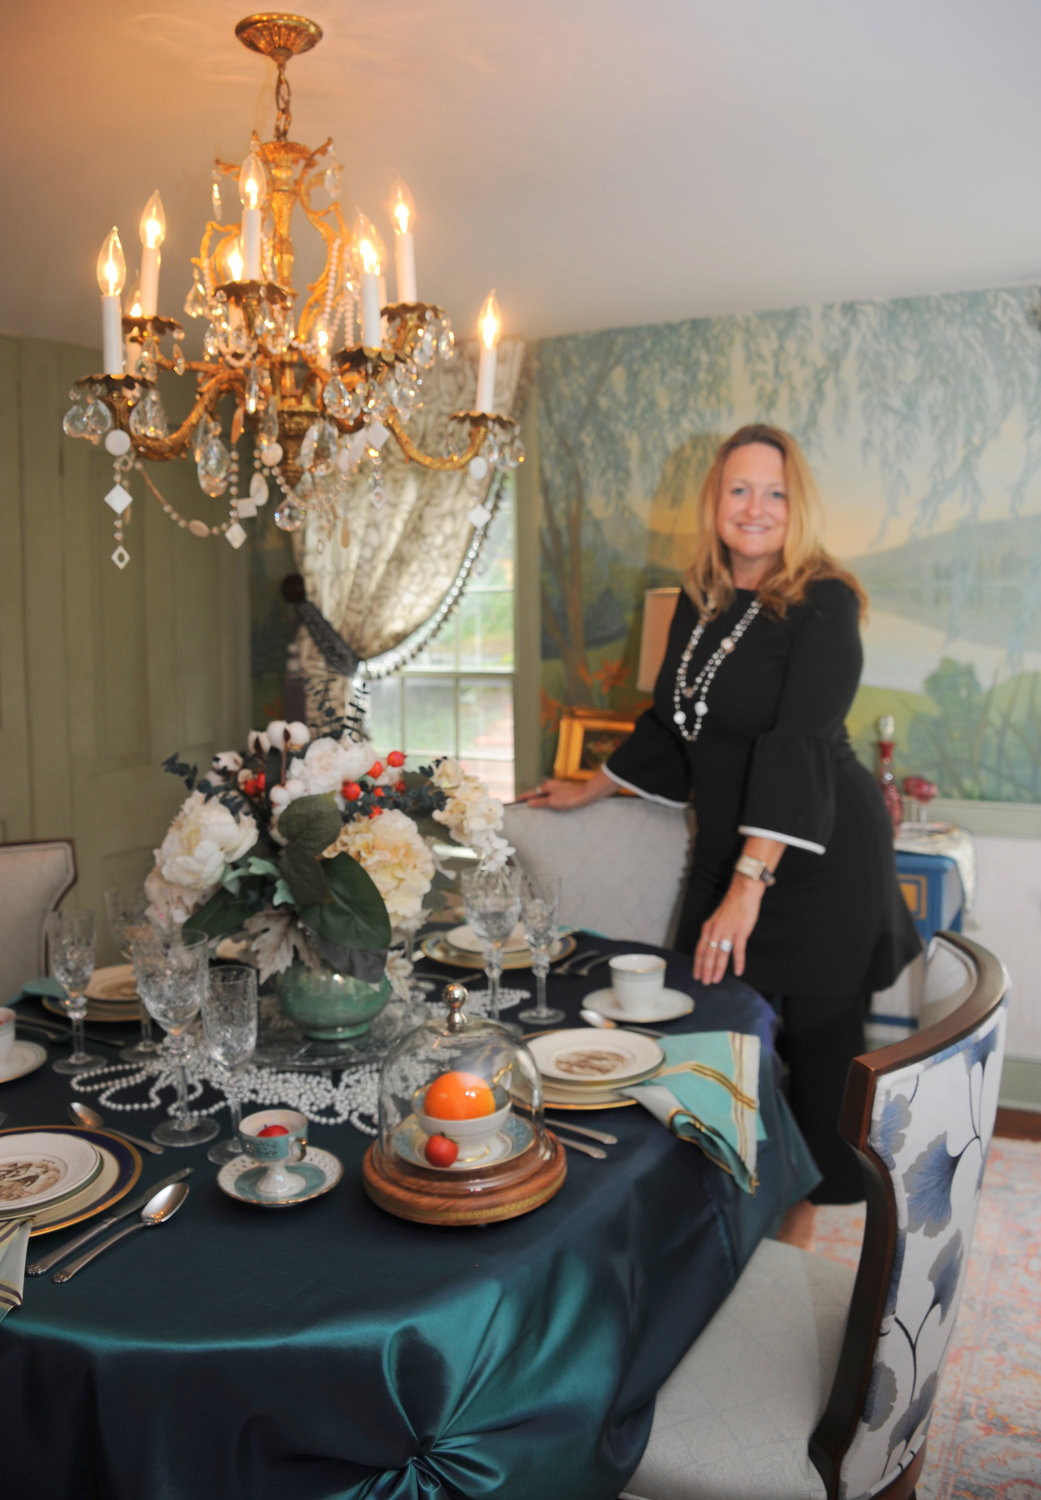 Angela Ast of ABCA Design designed the dining room “Dinner on the Delaware.”